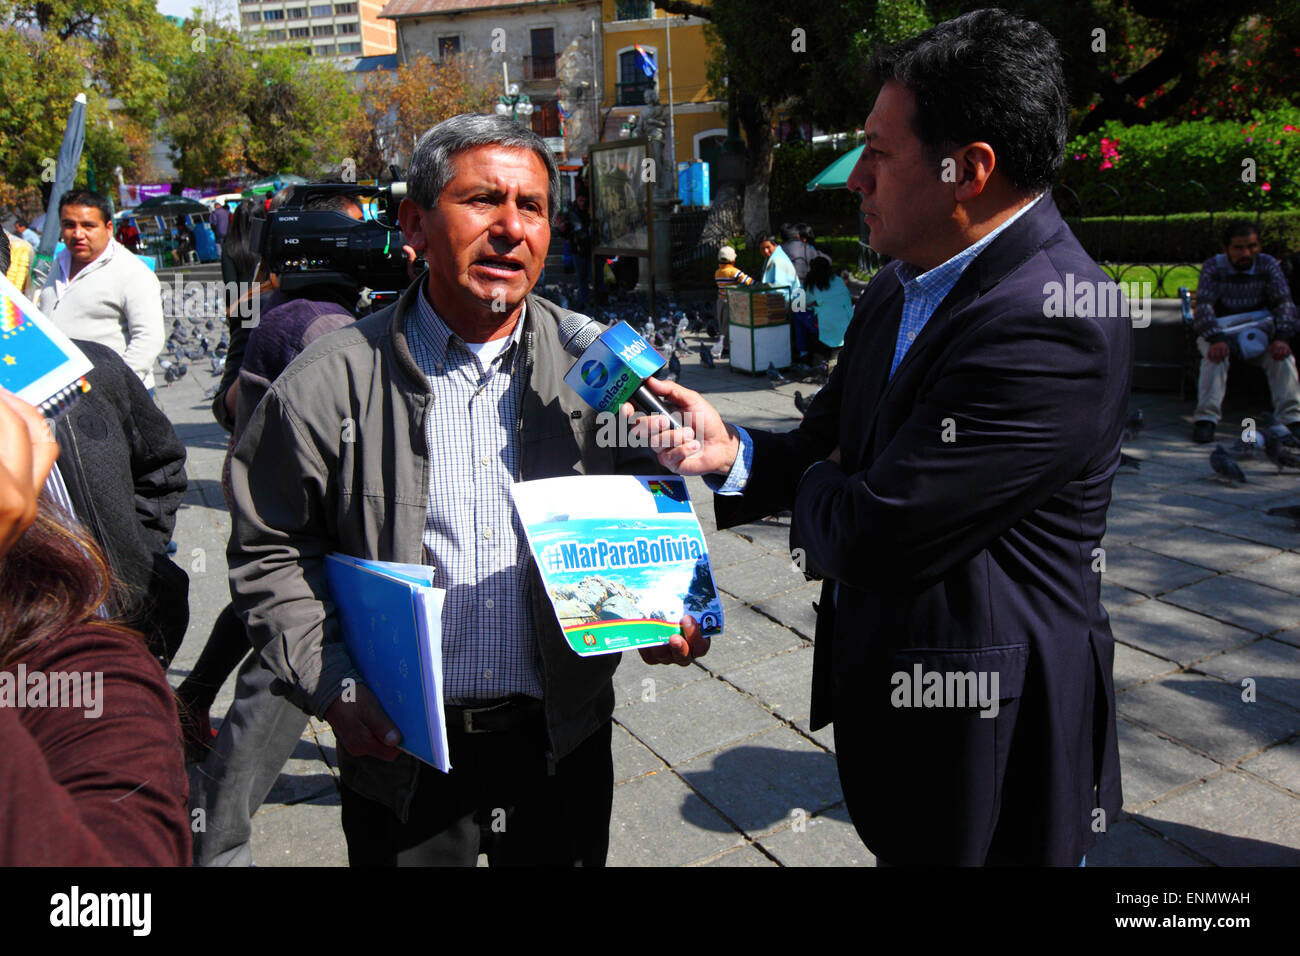 La Paz, Bolivia, 8th May 2015. A Bolivian man holds a banner with the hashtag #MarParaBolivia (Sea for Bolivia) while speaking to the local press at the end of Bolivia's final presentation to the International Court of Justice in The Hague, which had been shown live on a giant screen in Plaza Murillo. The initial hearings for Bolivia's case reclaiming access to the Pacific Ocean against Chile have been taking place in the ICJ this week, the hearings were to debate the Chilean objection that the court doesn't have the jurisdiction to judge the case. Credit:  James Brunker / Alamy Live News Stock Photo